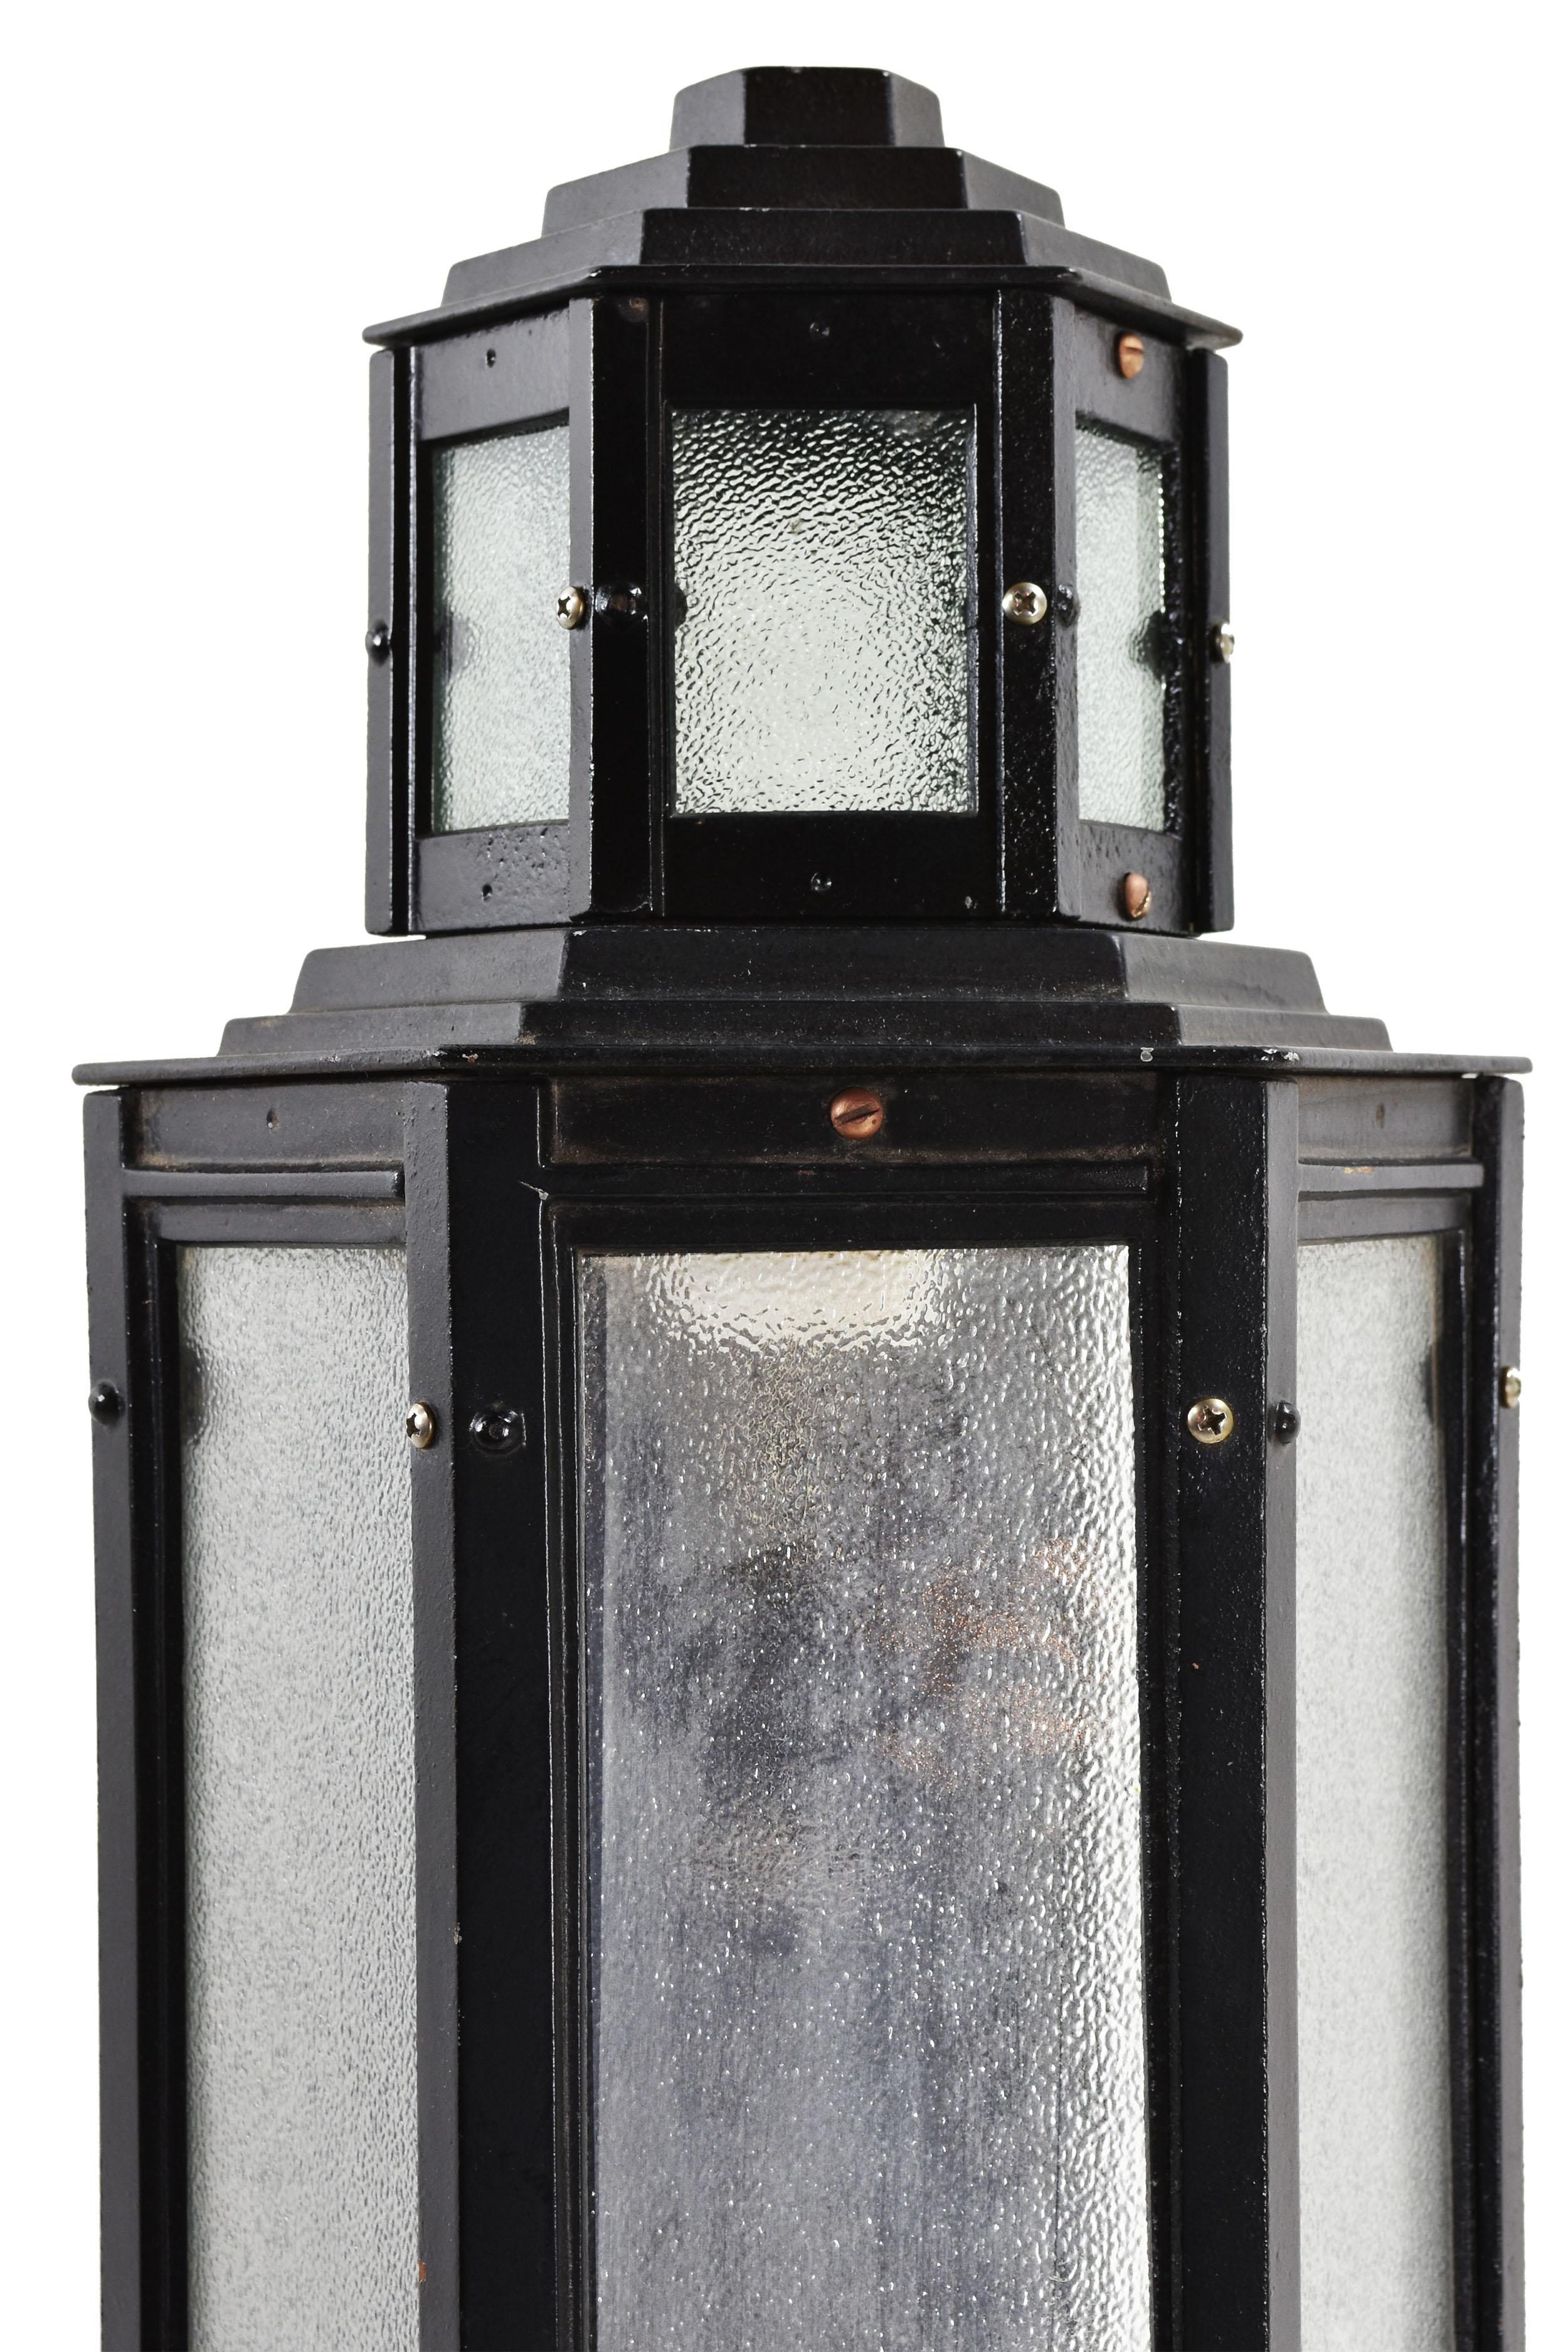 This impressive cast iron Art Deco exterior sconce features sharp hexagonal shapes and textured glass. Unique geometric designs highlight the stepped backplate of this skyscraper style piece, 

2 Available
circa 1920s
Condition: Excellent
Finish: